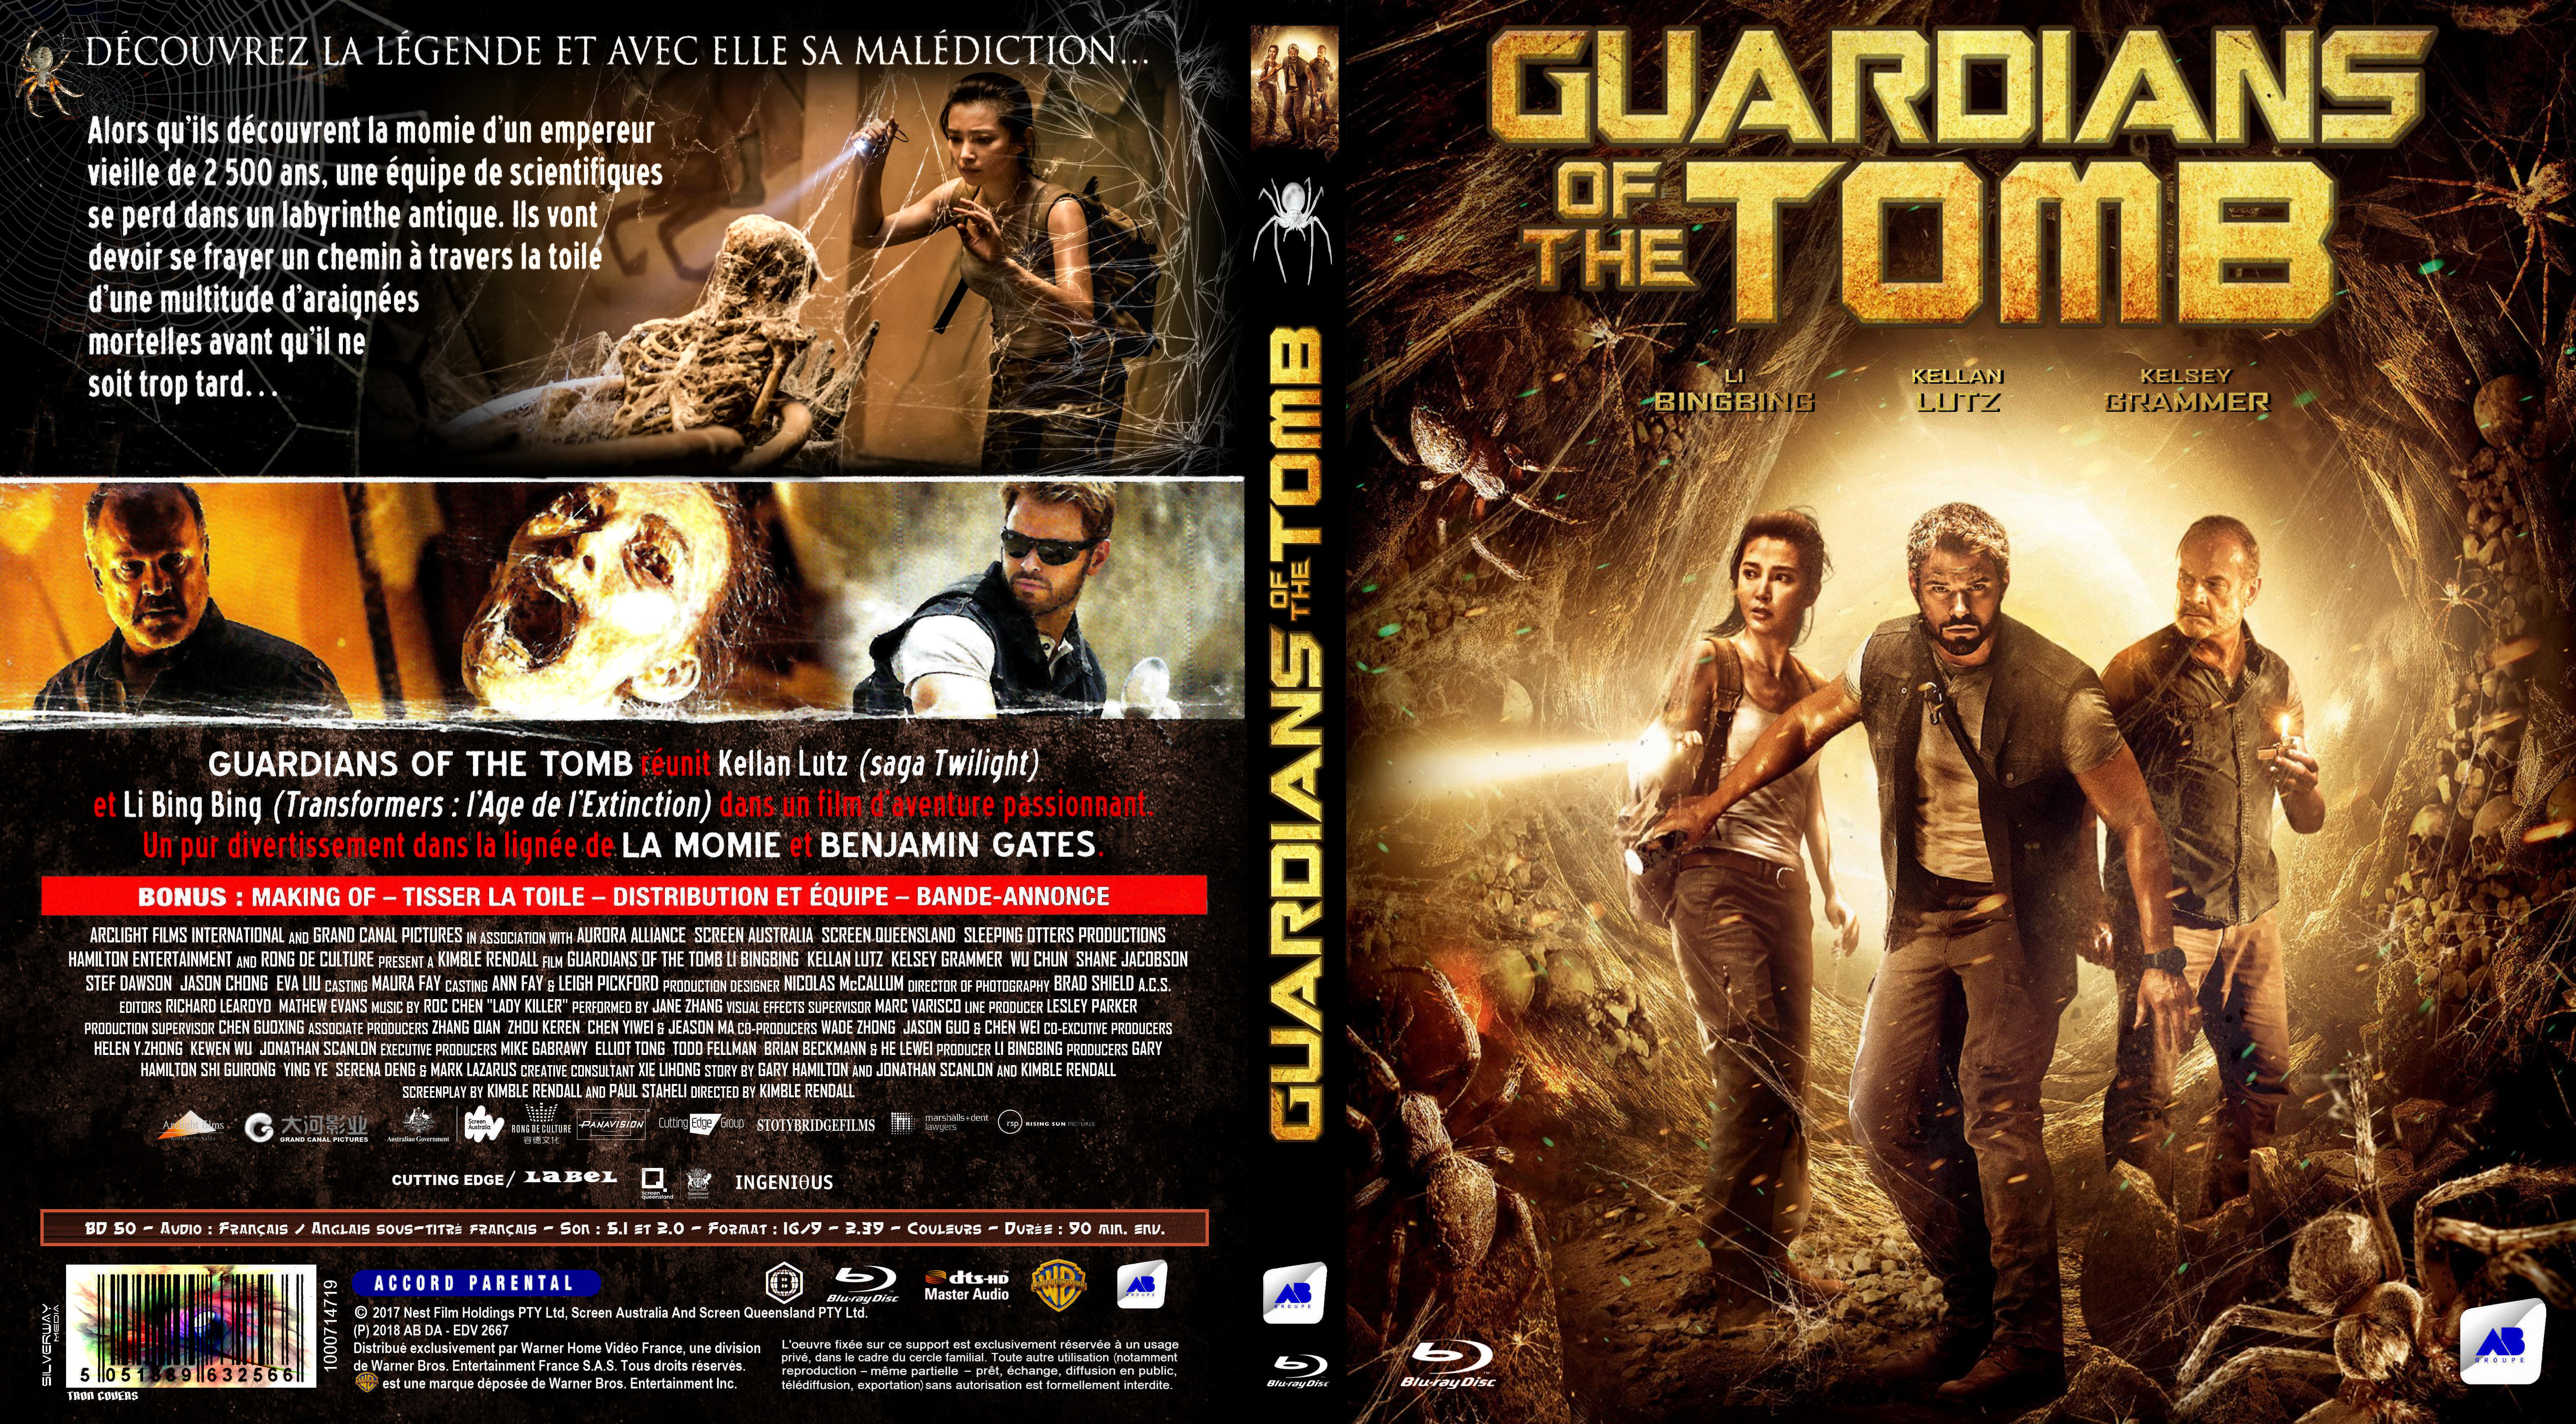 Jaquette DVD Guardians Of The Tomb custom (BLU-RAY)